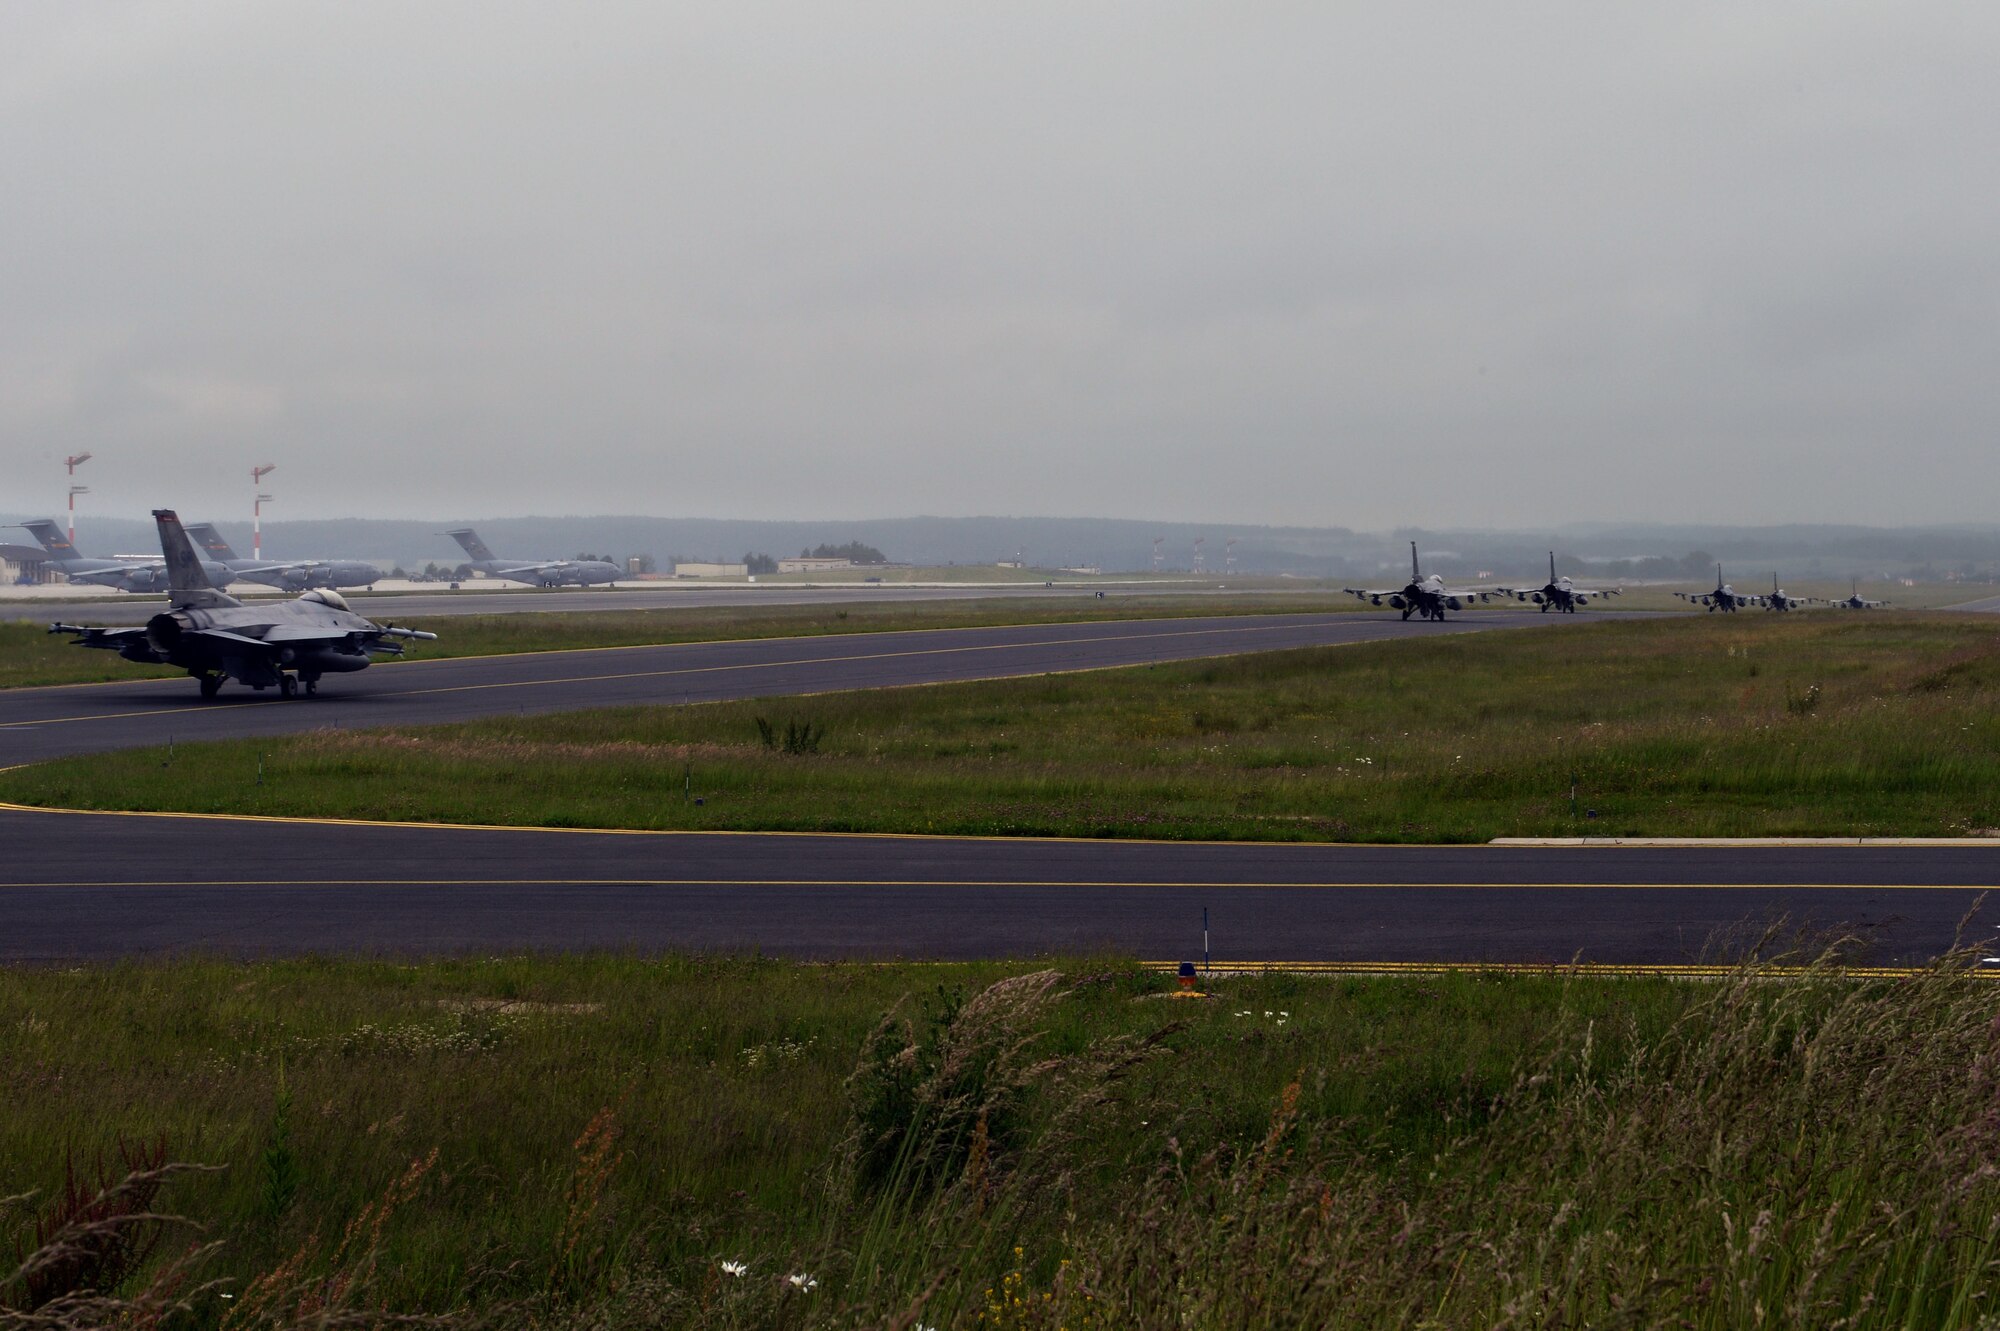 U.S. Air Force F-16 Fighter Falcon fighter aircraft taxi down the runway on Spangdahlem Air Base, Germany, before departing for the U.S. Air Force Aviation Detachment, Poland,  May 30, 2014. This is the fourth fighter aircraft and seventh overall rotation the Av-Det has hosted. (U.S. Air Force photo by Senior Airman Alexis Siekert/Released)  